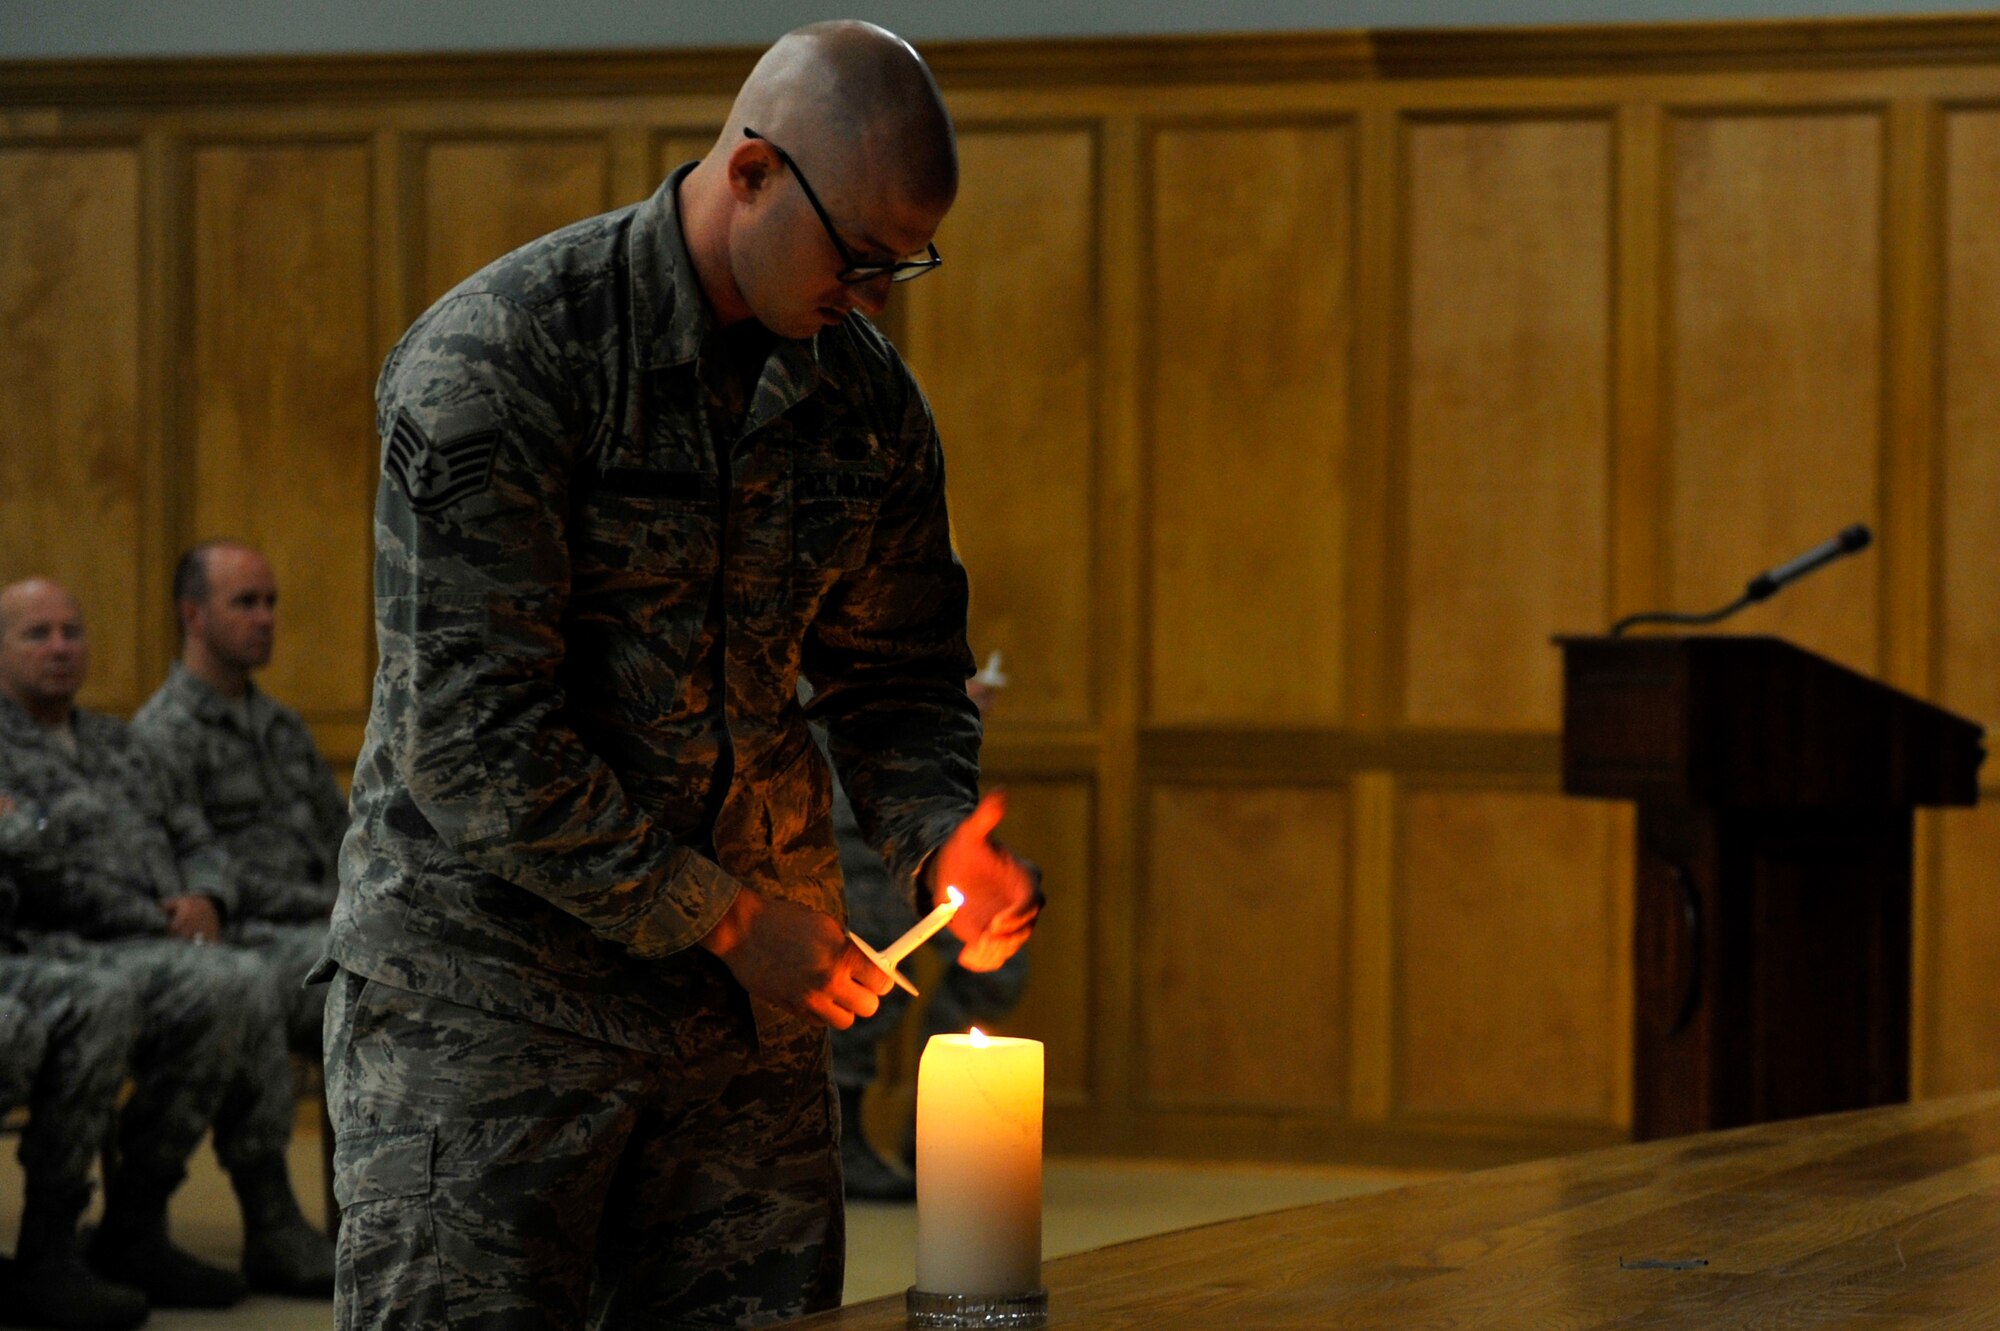 U.S. Air Force Staff Sgt. Austin Babcock-Kochera, 19th Security Forces, lights a candle during the Holocaust Memorial Ceremony May 5, 2016, at Little Rock Air Force Base. The candle lighting portion of the ceremony was in remembrance of the 6 million Jews who were killed during the Holocaust.  (U.S. Air Force photo by Kevin E. Sommer Giron)